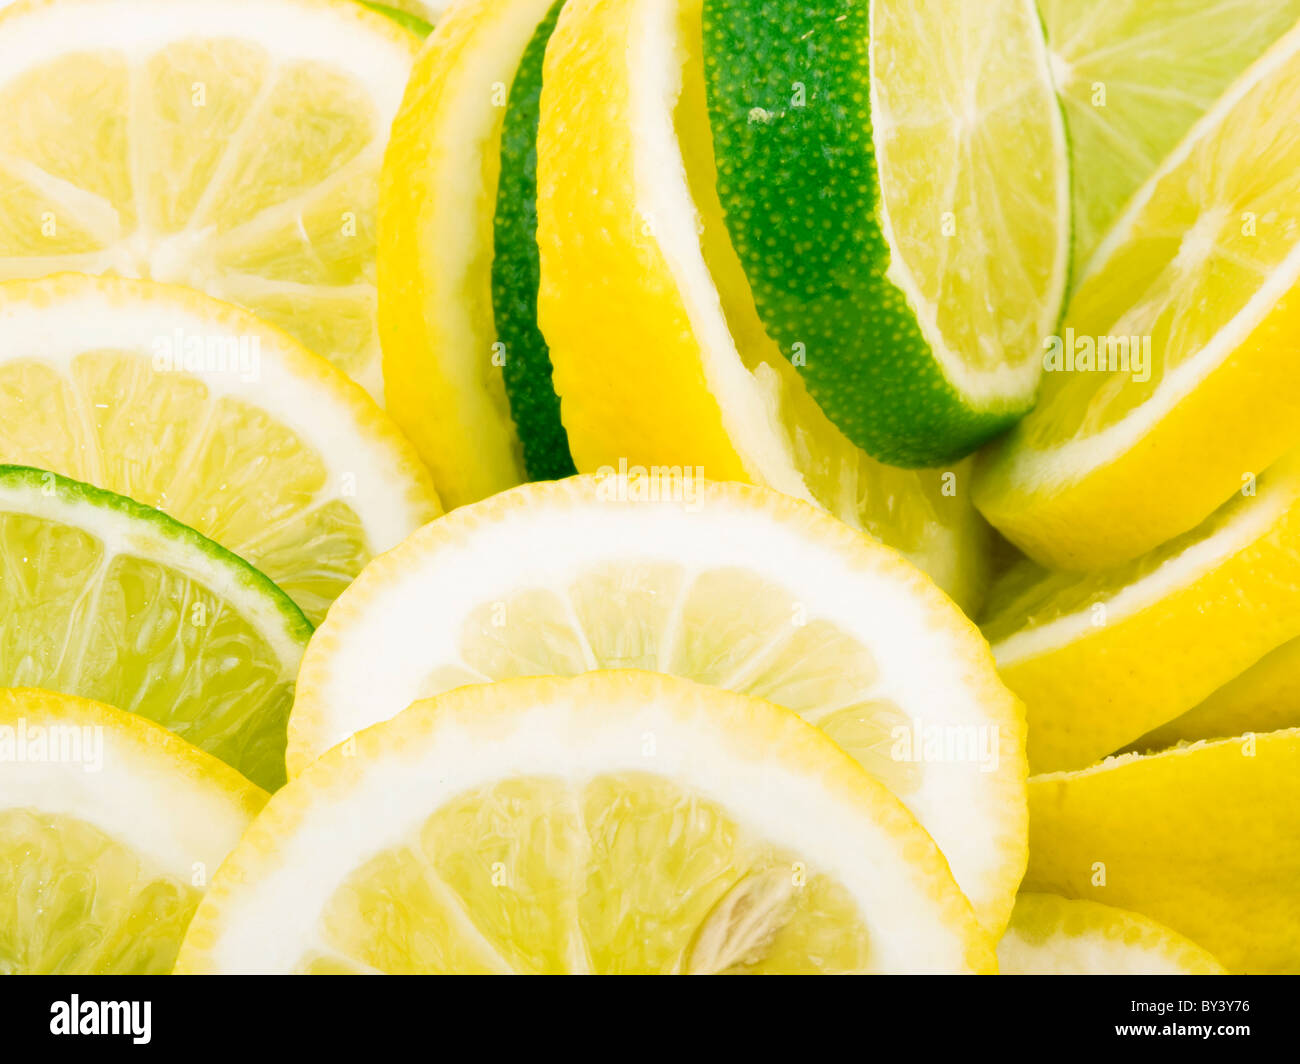 Closeup picture of lemon and lime slices Stock Photo